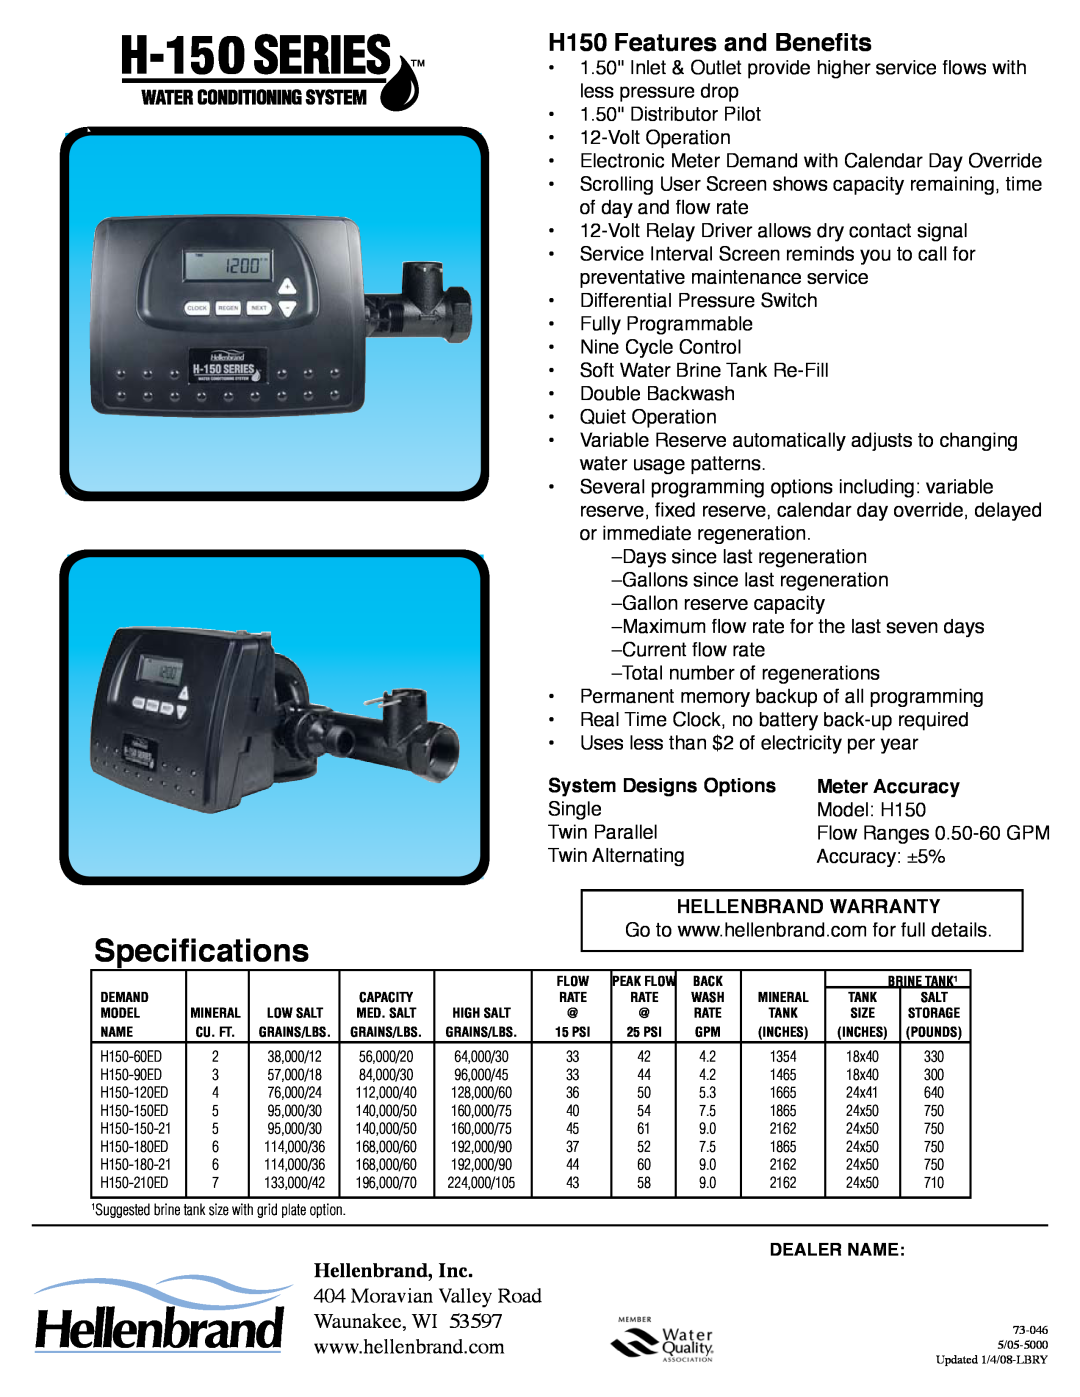 Hellenbrand H-150 Series manual Specifications, H150 Features and Benefits, Hellenbrand, Inc, System Designs Options 